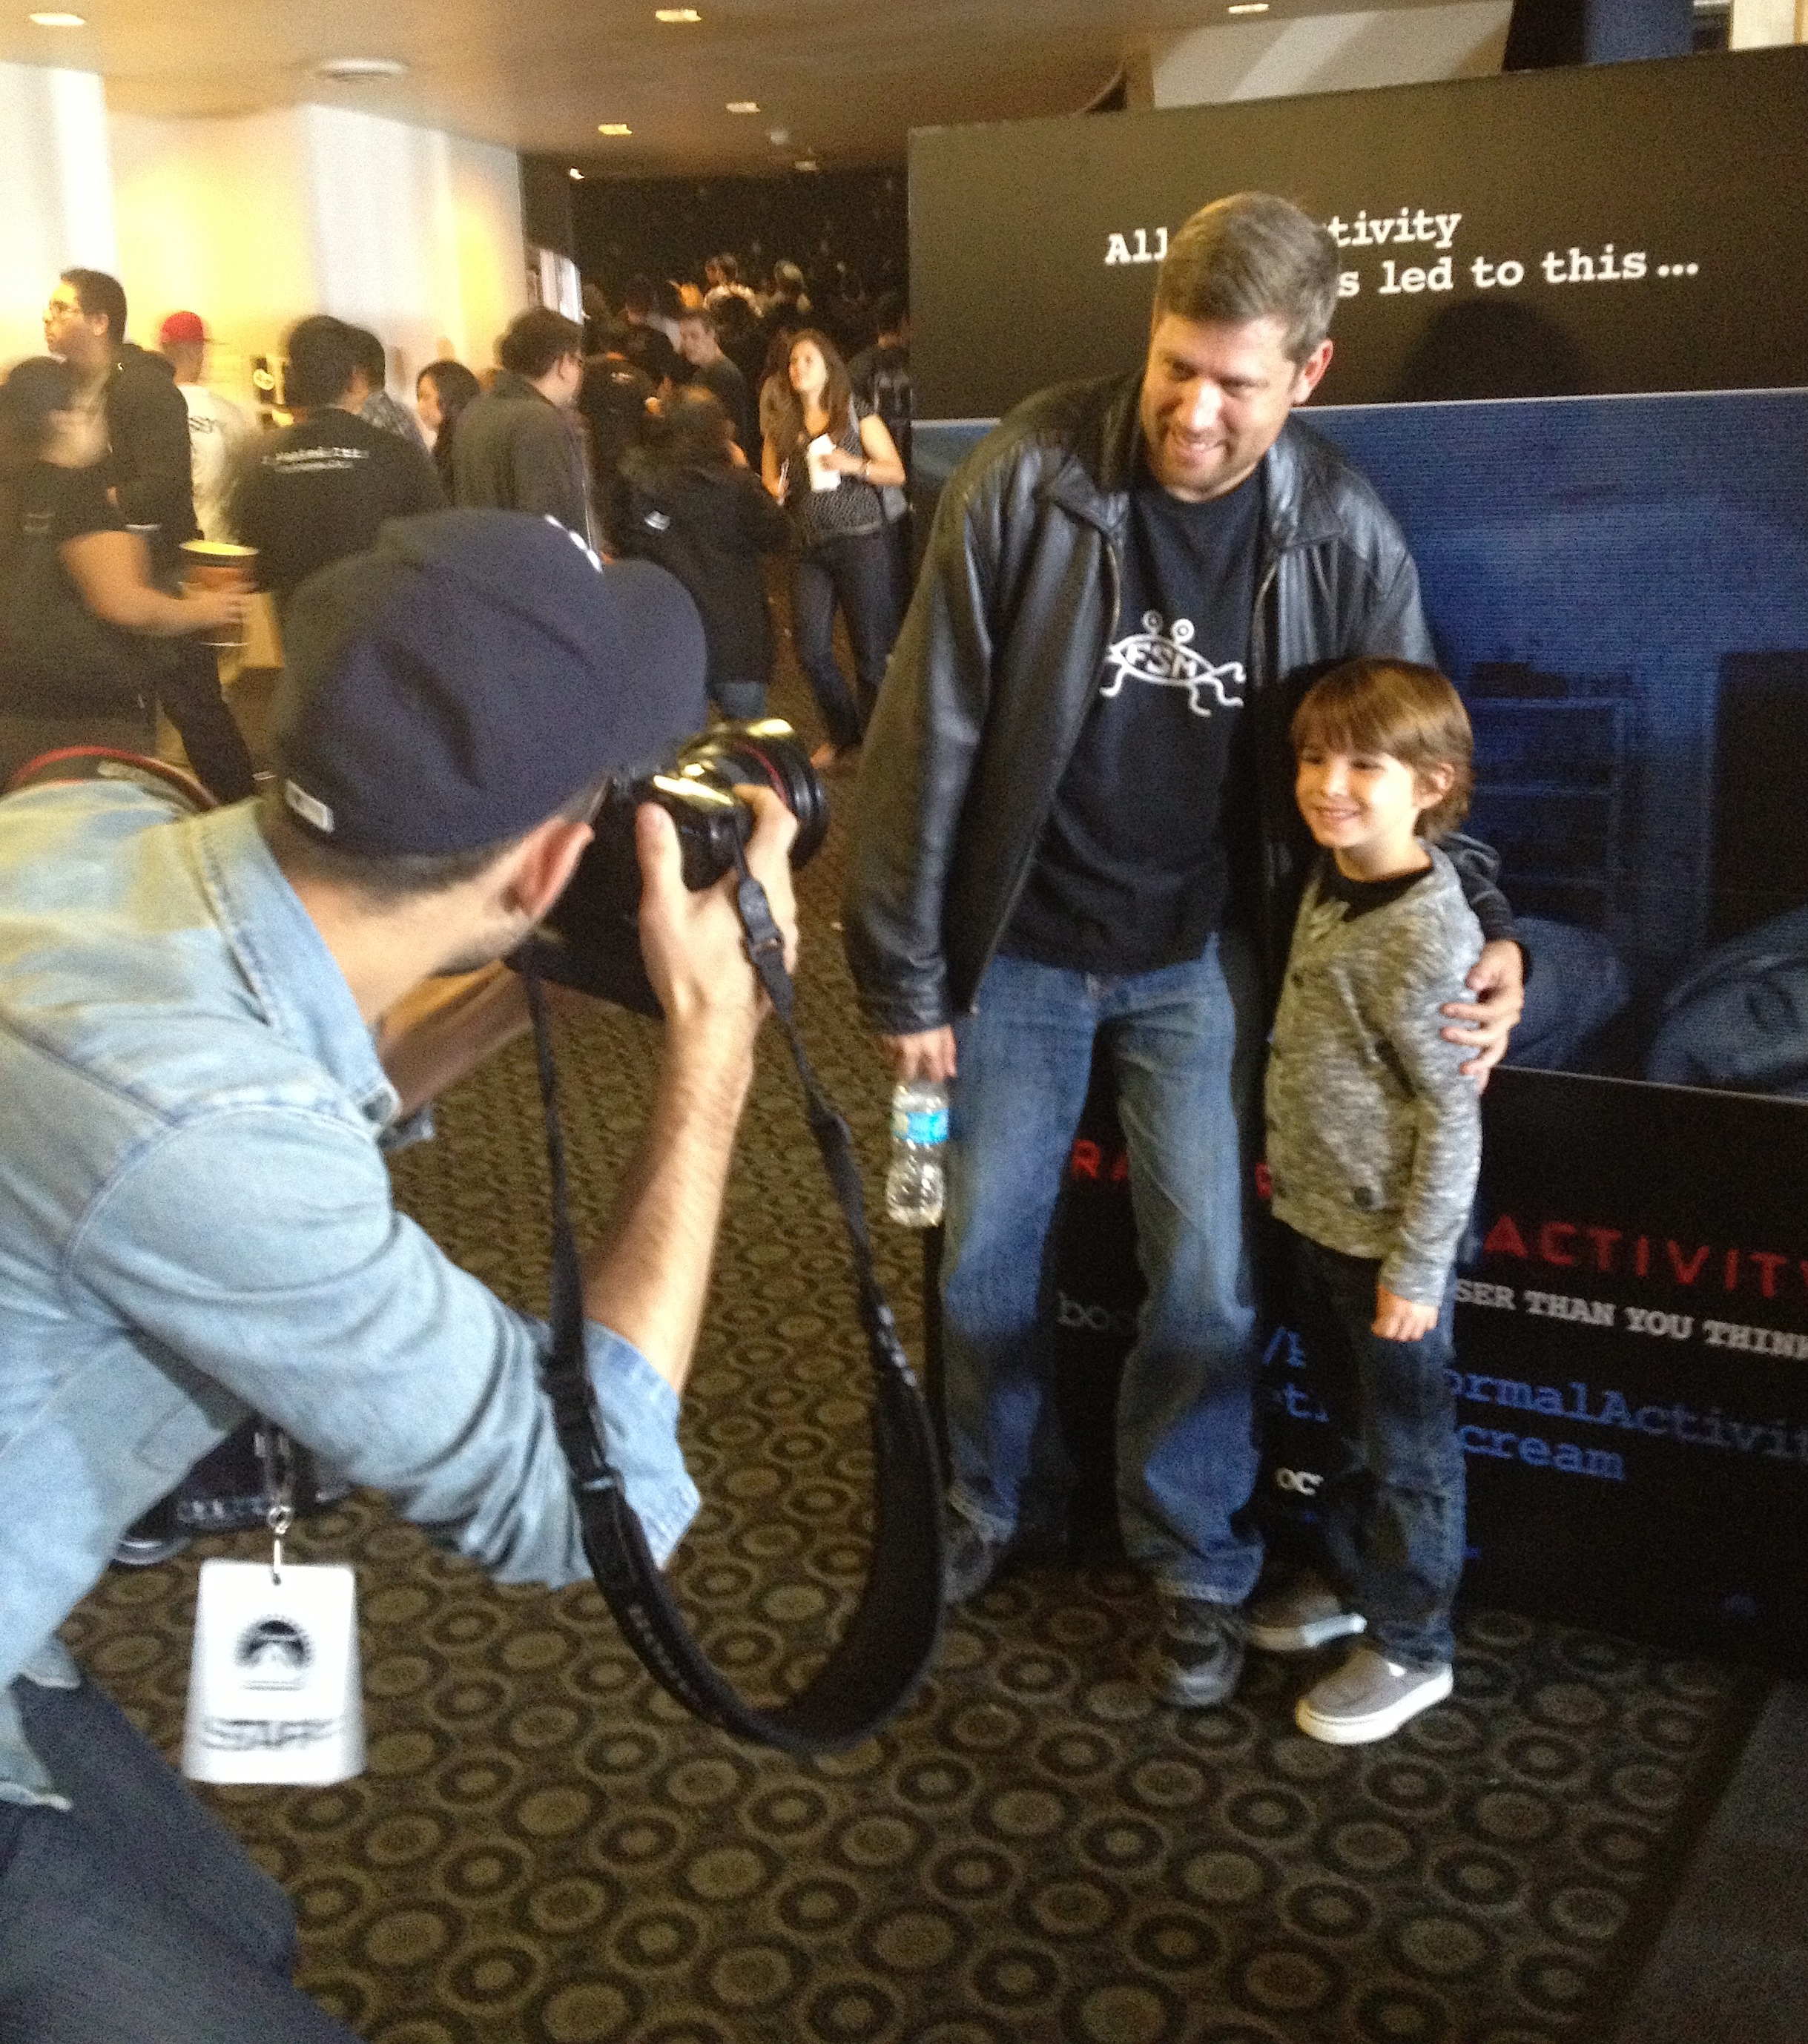 Aiden with producer Oren Peli at the LA premiere of Paranormal Activity 4.